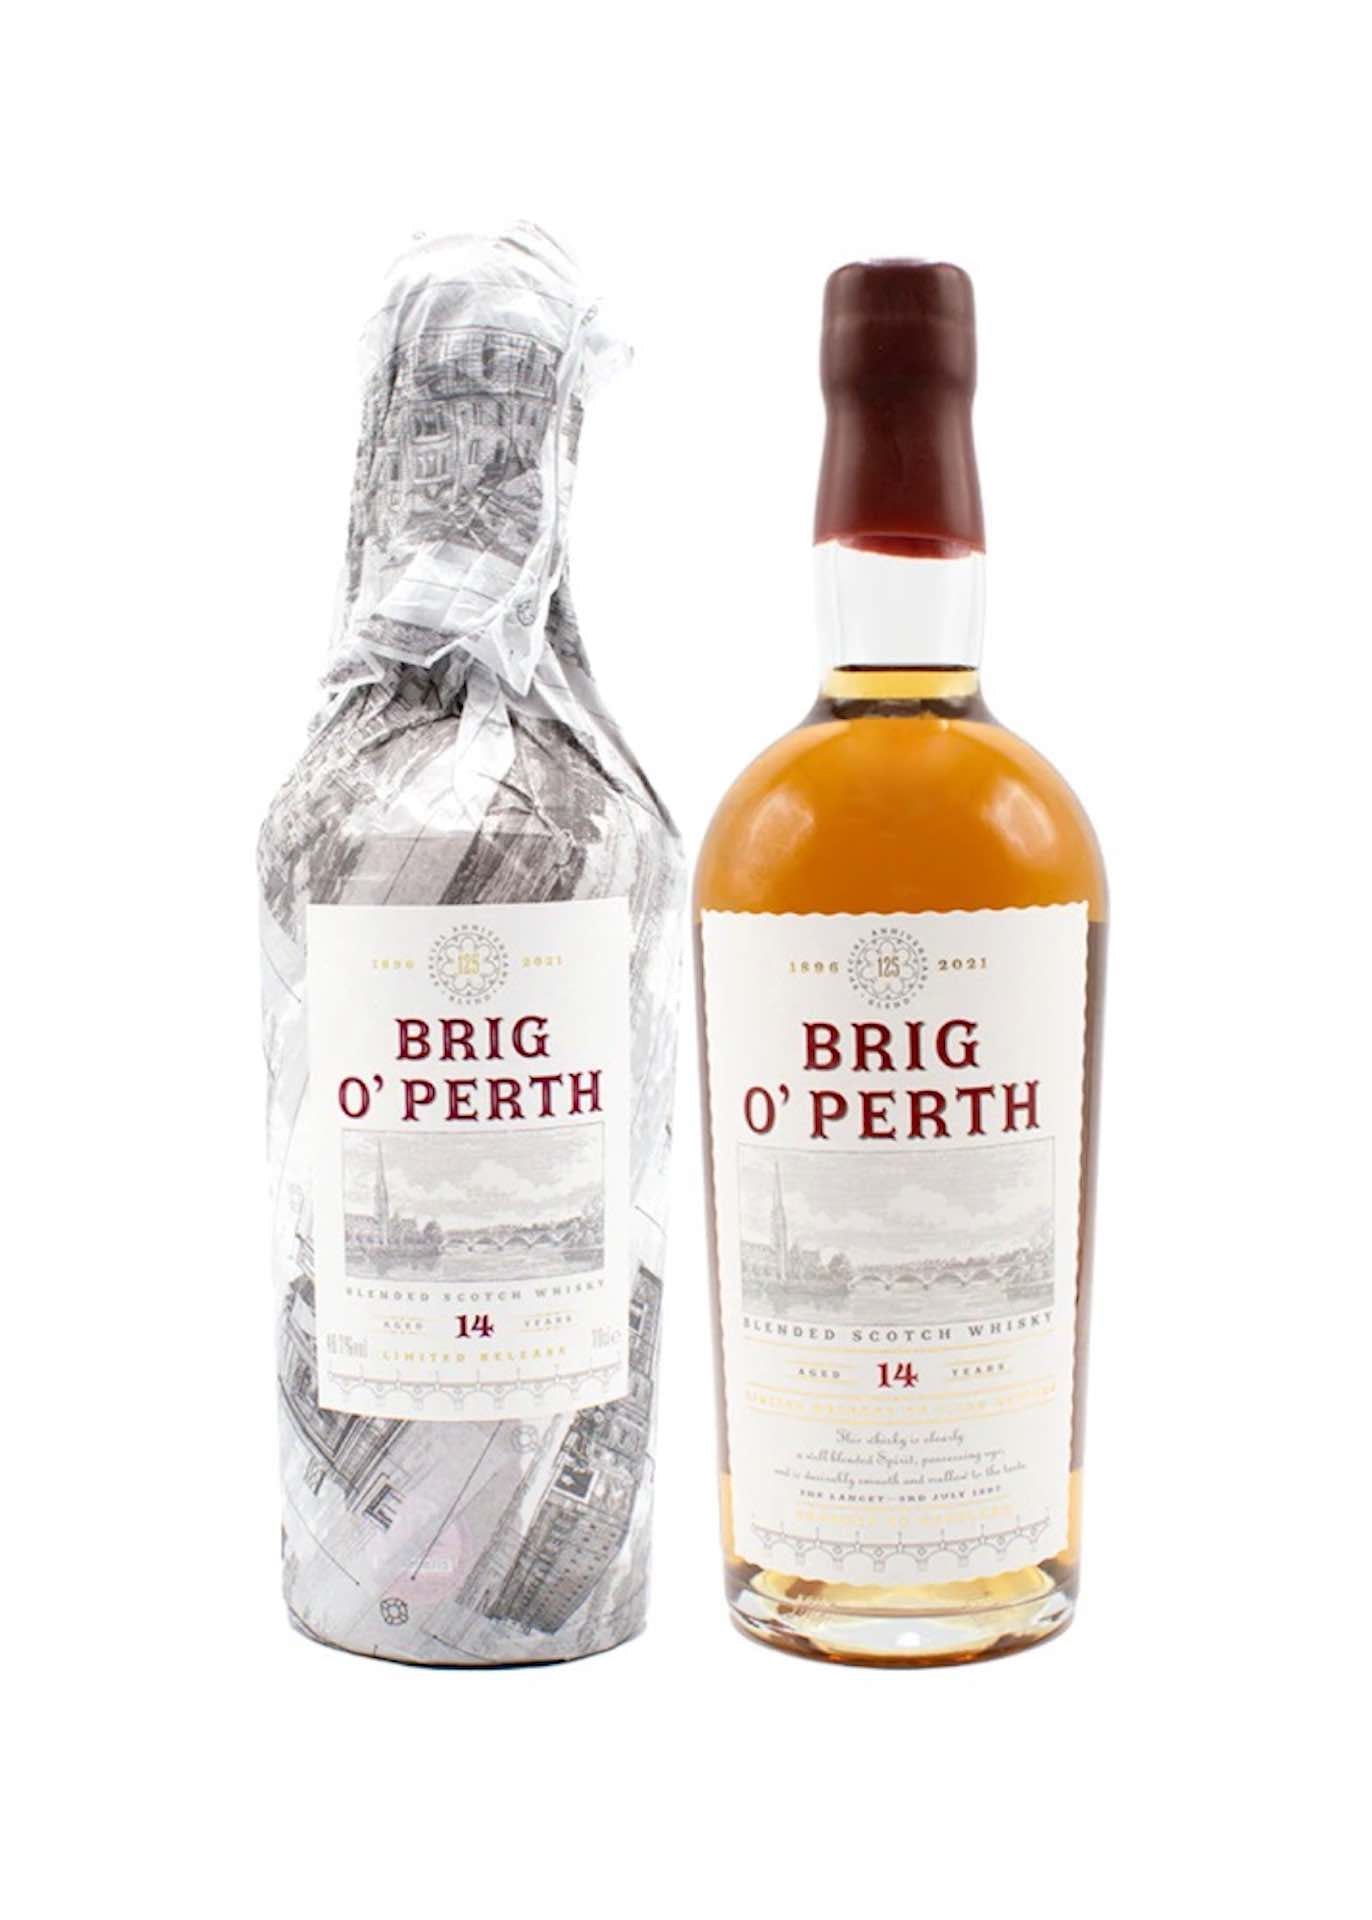 Brig O'Perth 14 Year Old, 125th Anniversary Blended Scotch Whisky